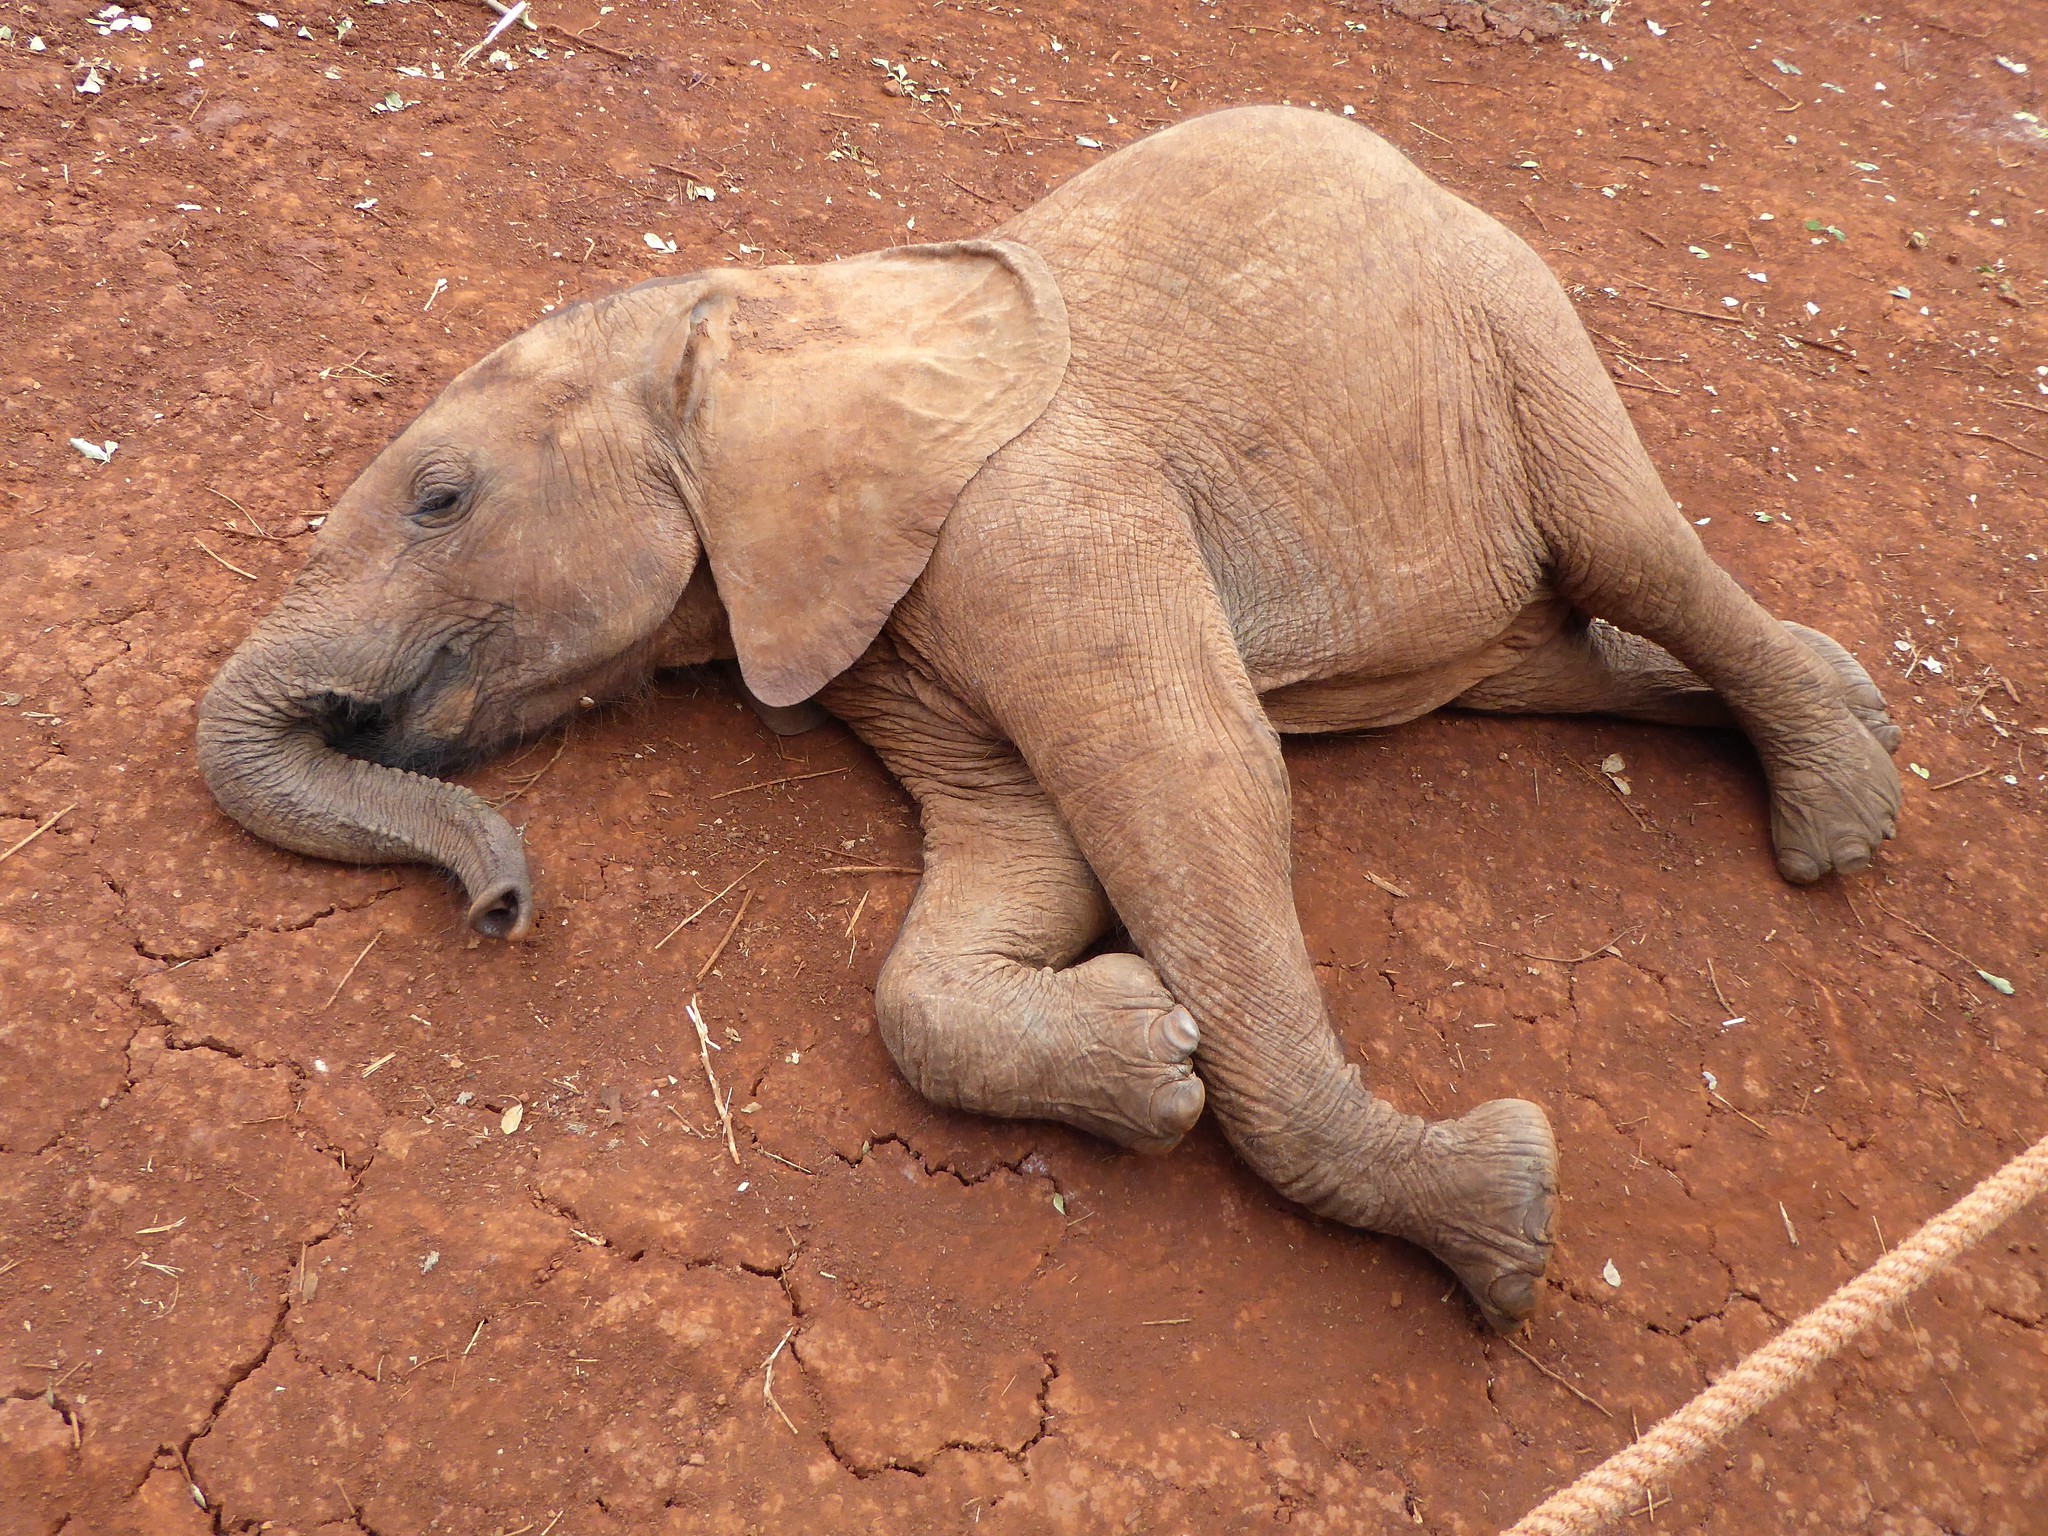 A young elephant rolls around in the dirtat Sheldrick Wildlife Trust's Orphans' Project